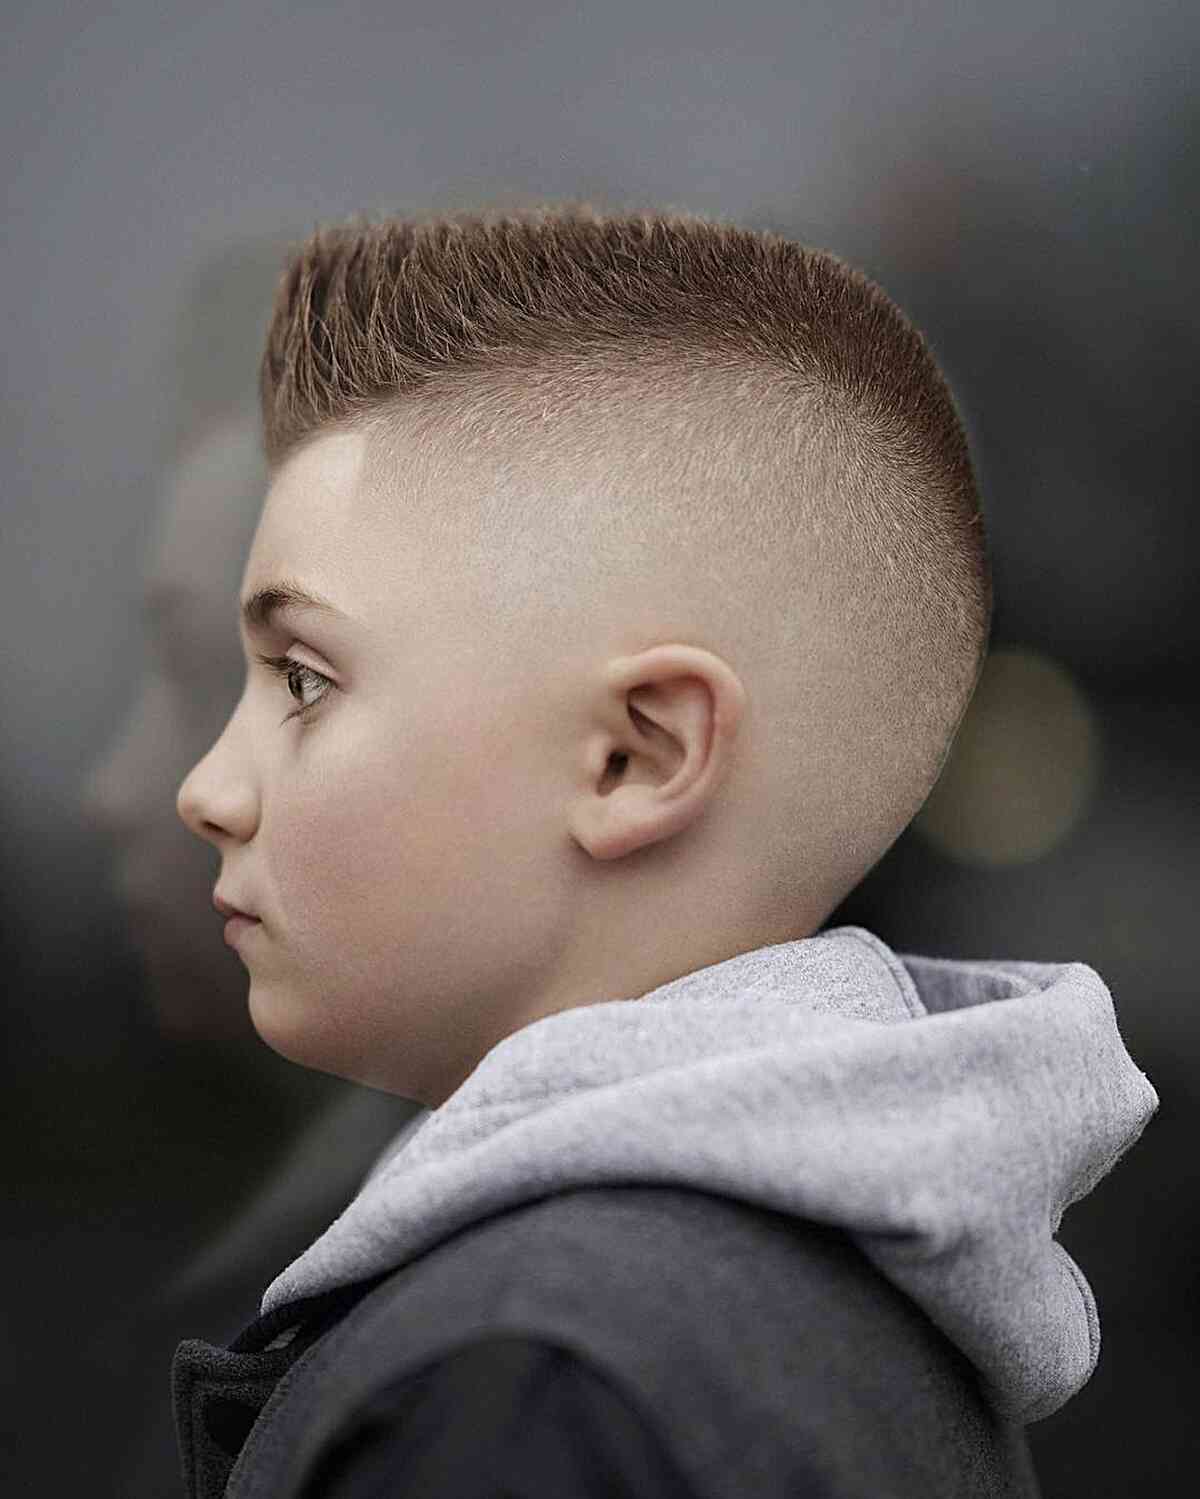 Incredible Collection of 999+ Boys Haircut Styles: Stunning Full 4K Images